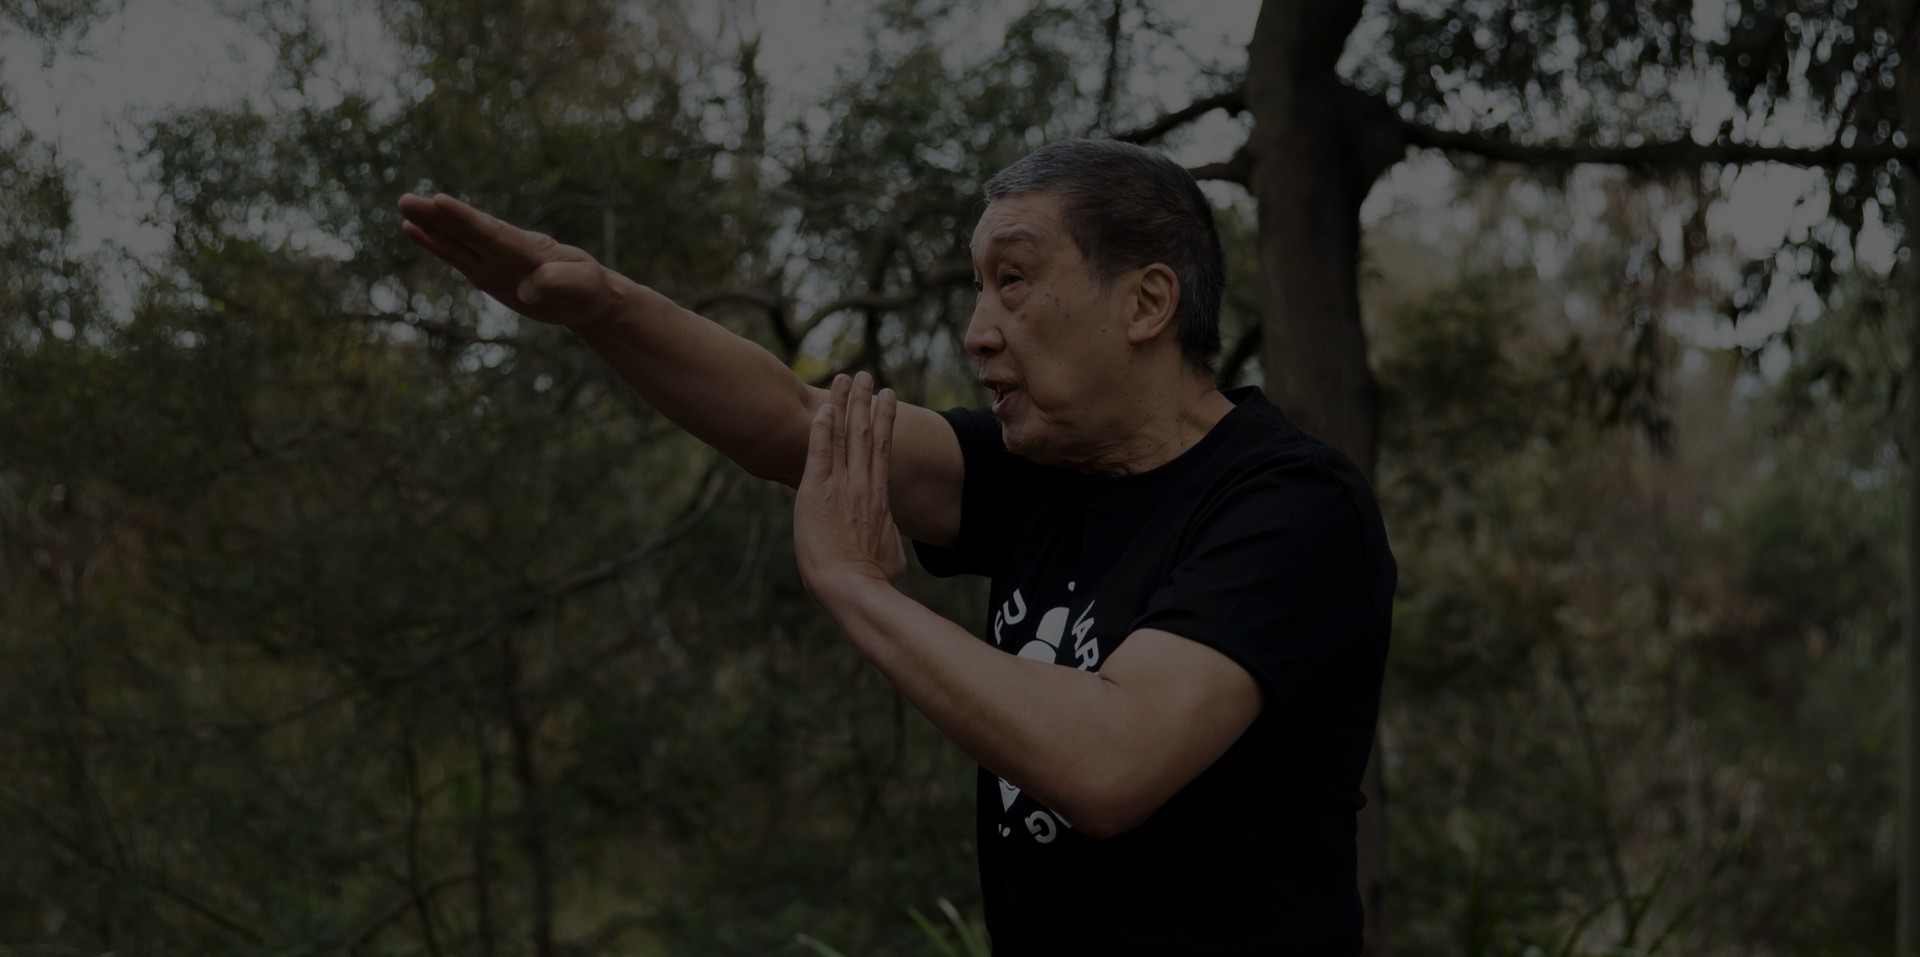 Barry Pang demonstrates Wing Chun technique